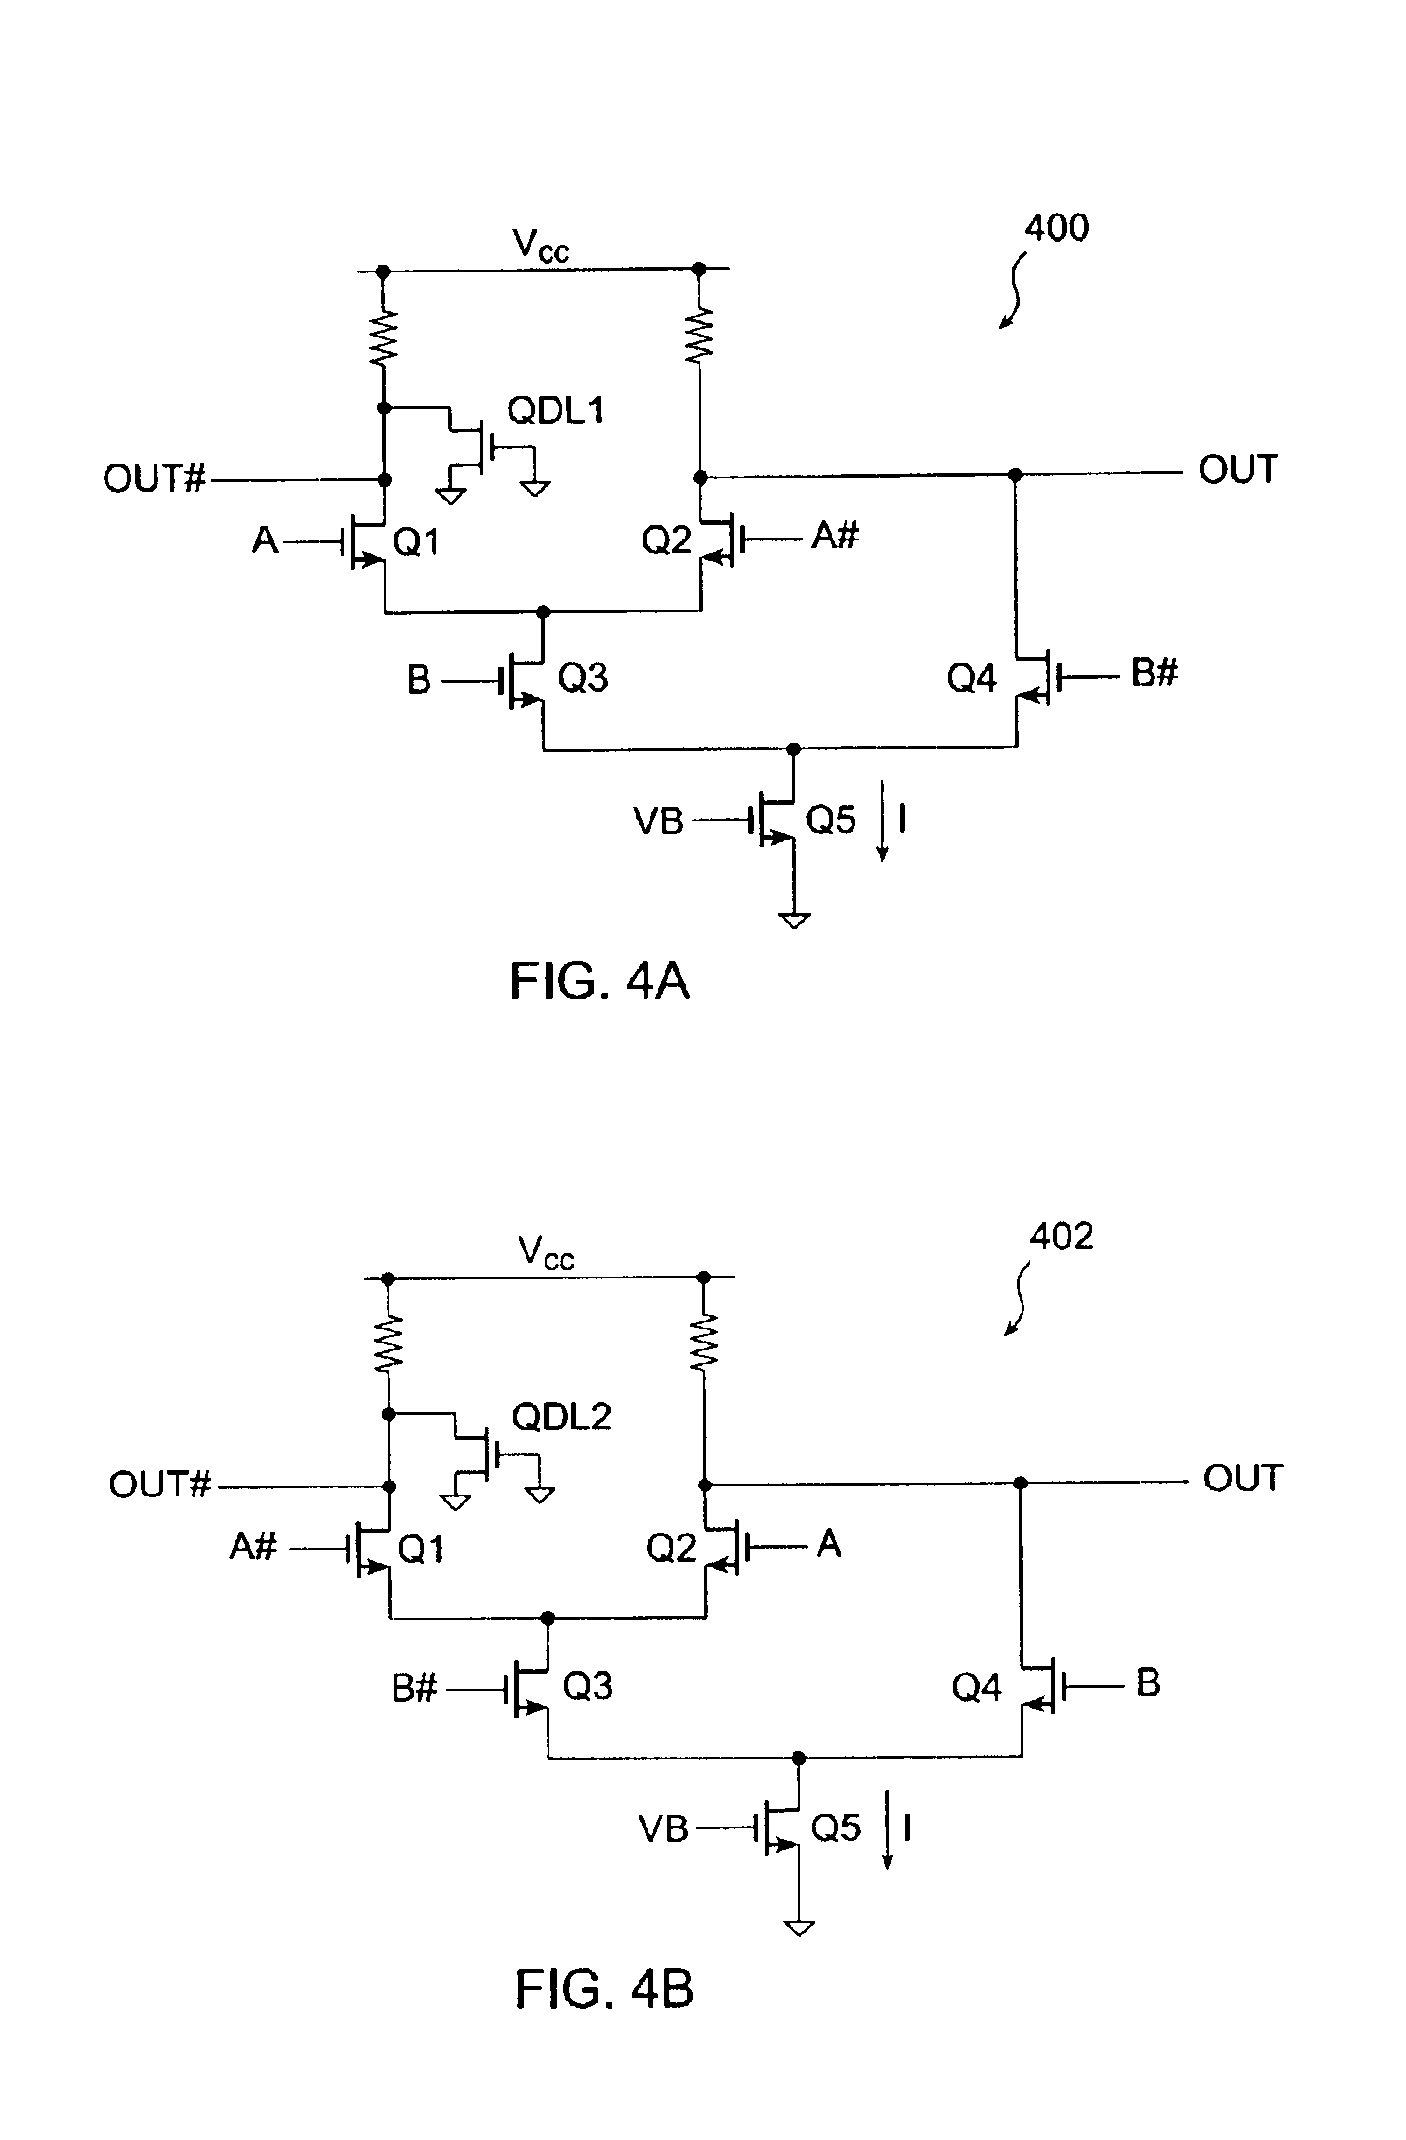 Current-controlled CMOS logic family